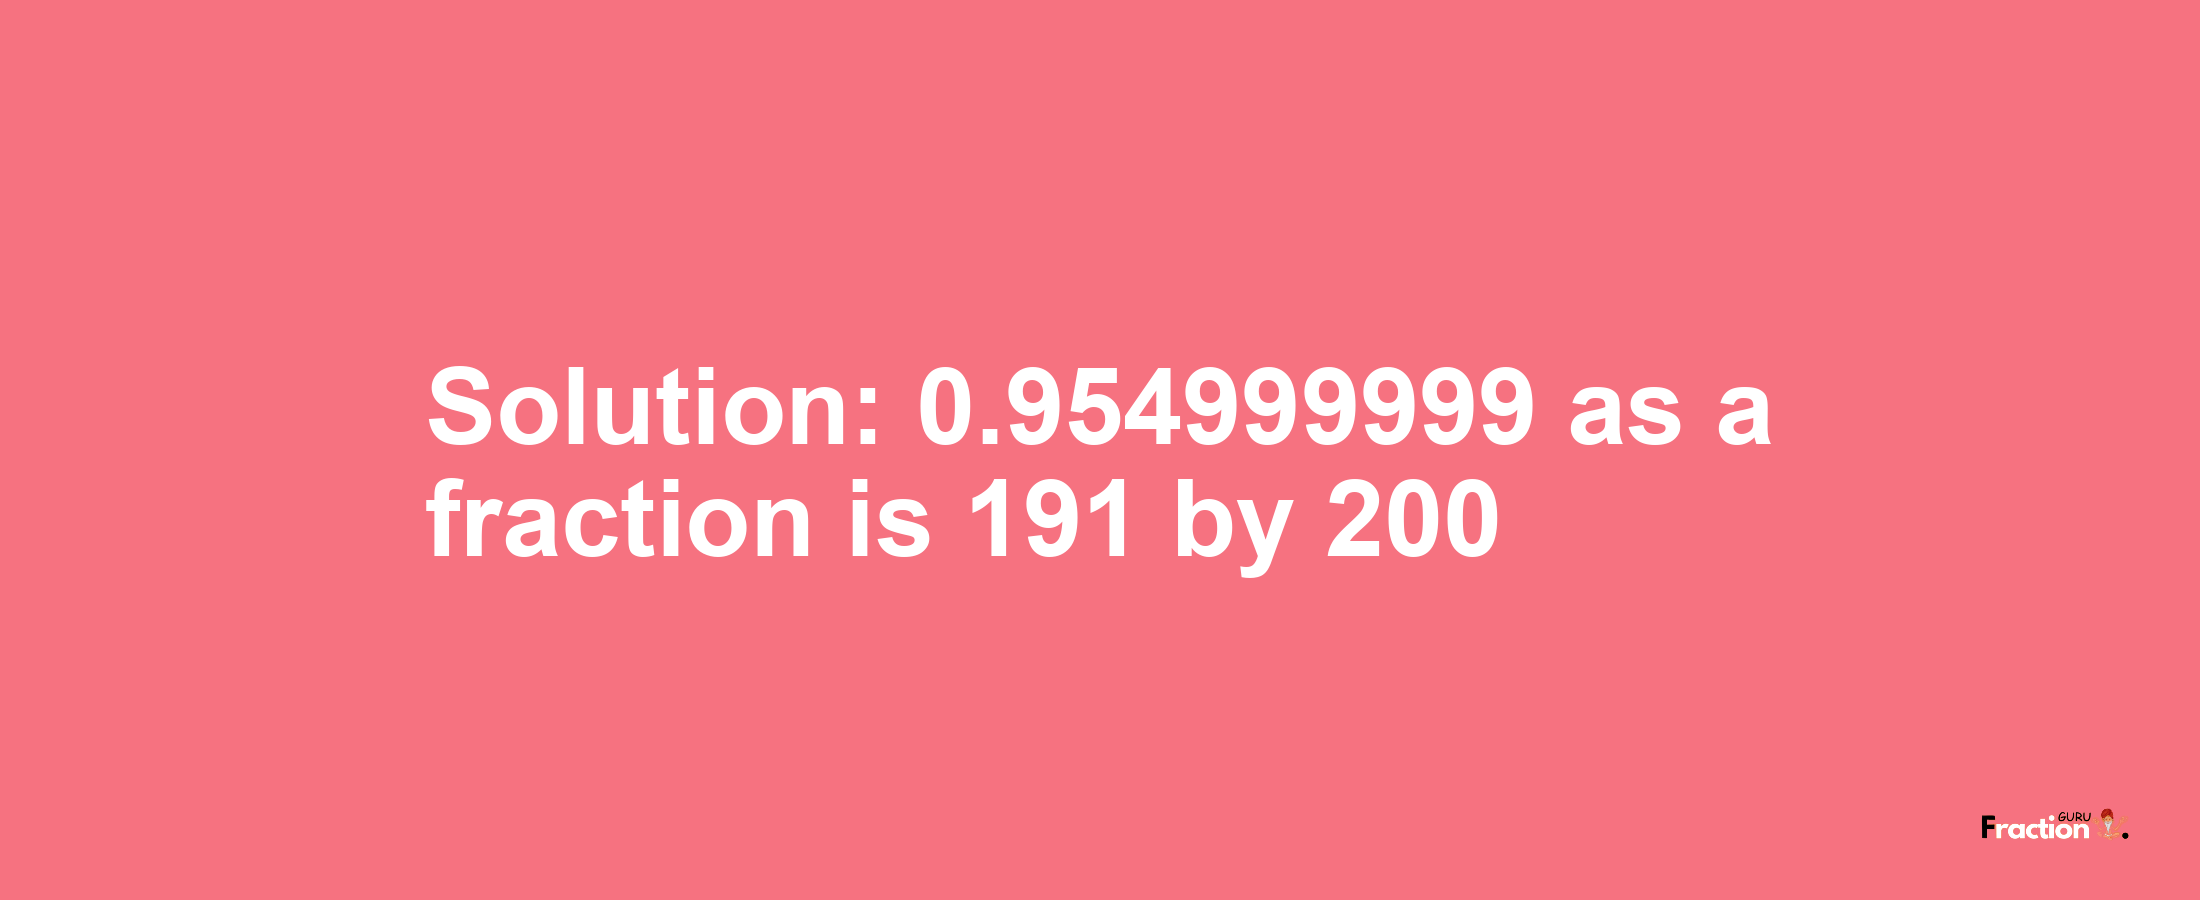 Solution:0.954999999 as a fraction is 191/200